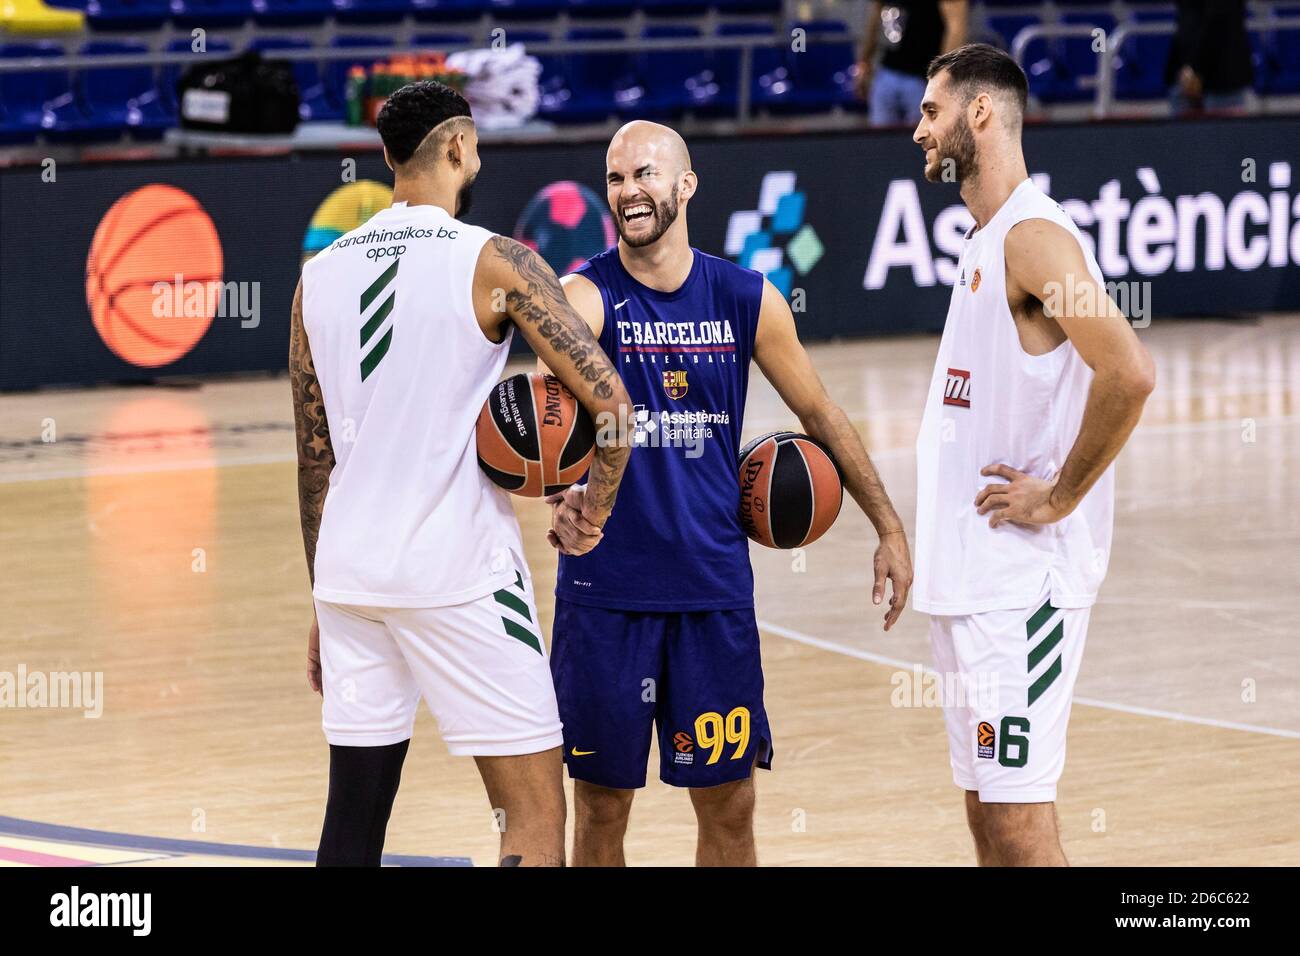 Papagiannis High Resolution Stock Photography and Images - Alamy